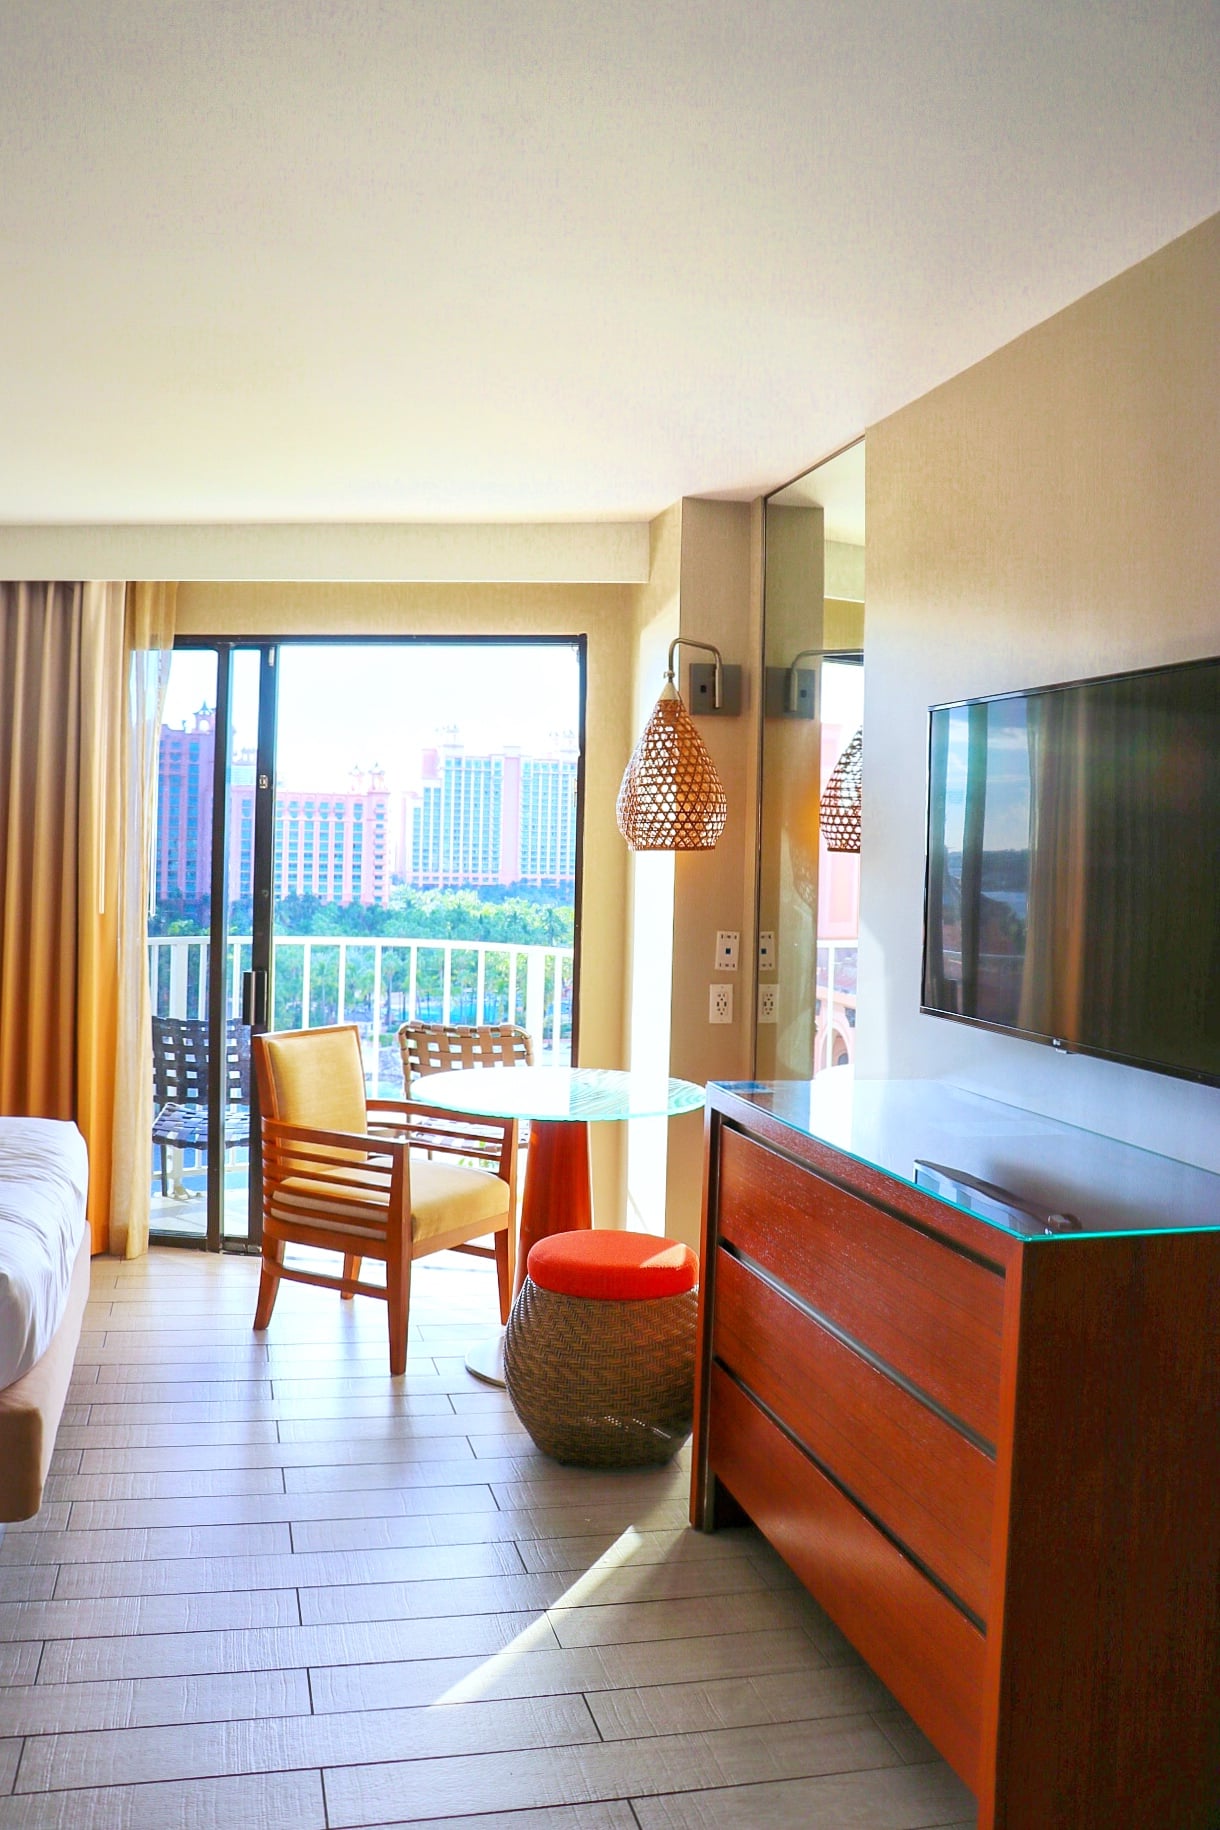 Premium Double Queen Water View Room in The Coral tower at Atlantis Paradise Island